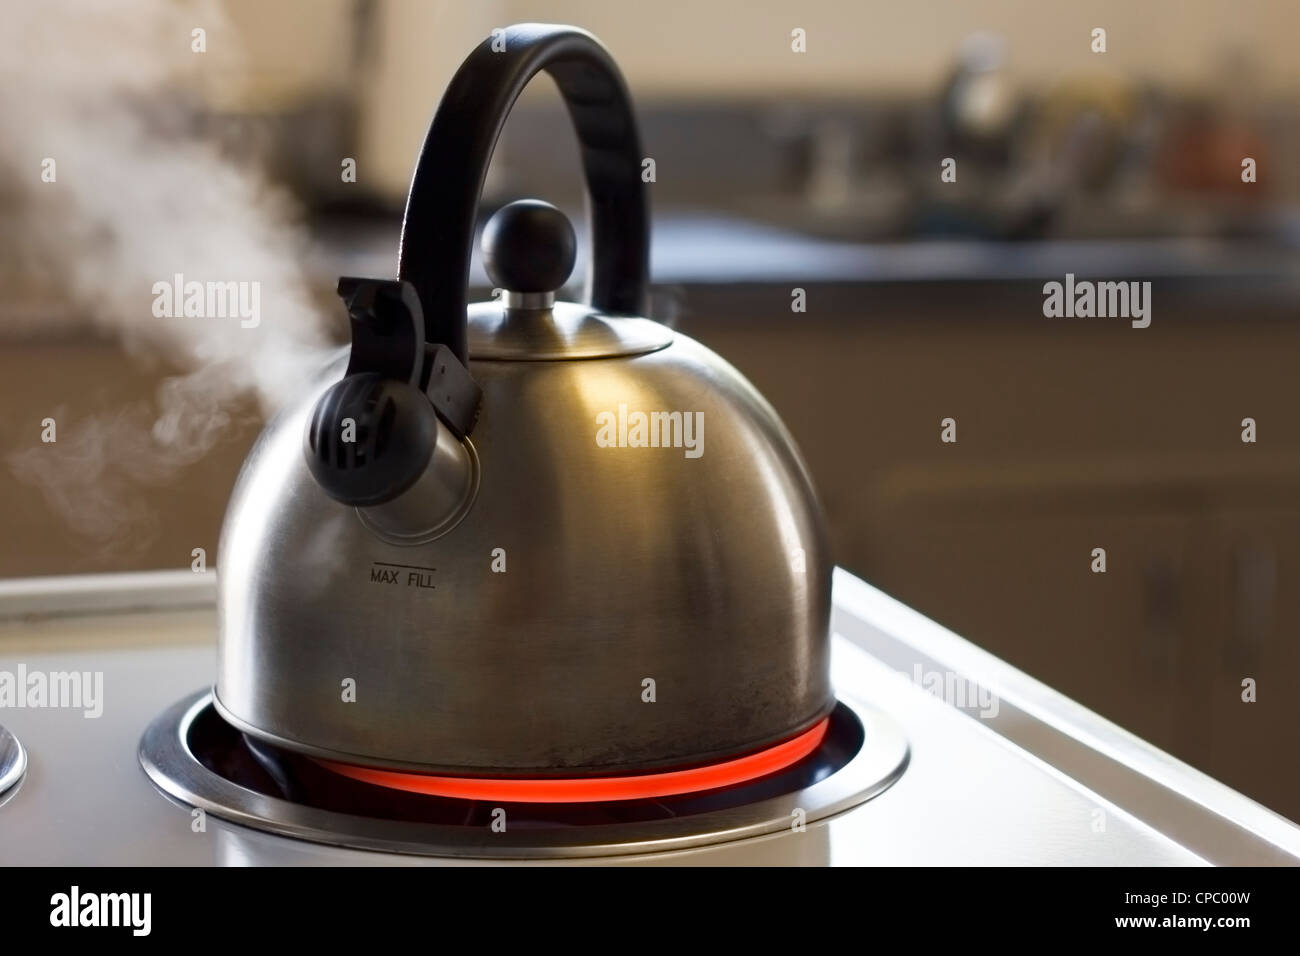 https://c8.alamy.com/comp/CPC00W/stainless-steel-tea-kettle-boiling-with-a-kitchen-in-the-background-CPC00W.jpg